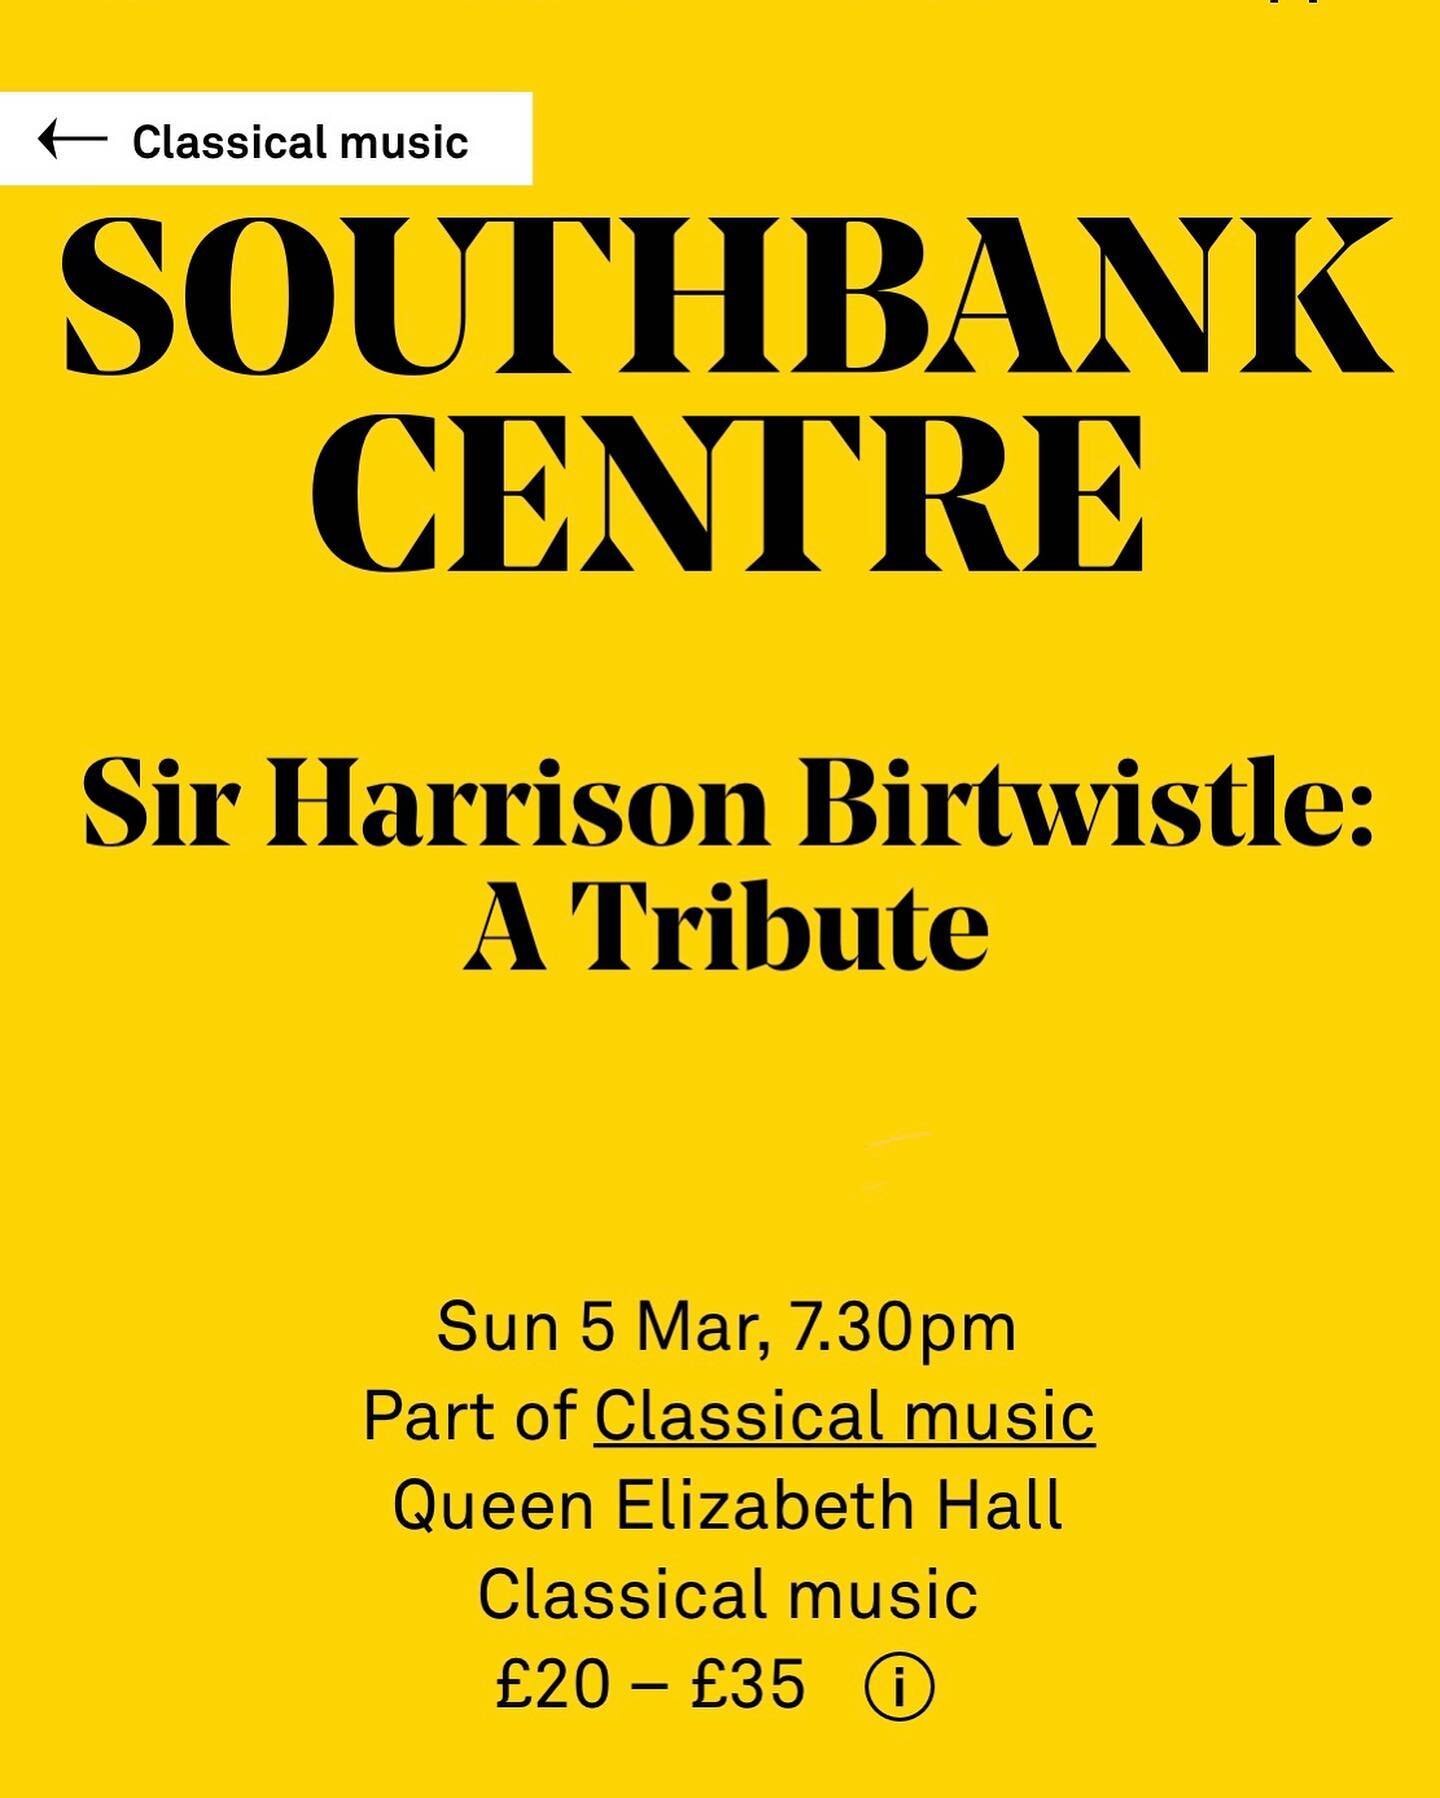 This March I&rsquo;ll be making my @southbankcentre debut alongside @lisa_dafydd in a concert honouring the late composer, Sir Harrison Birtwistle with the  @london.sinfonietta under the baton of Martyn Brabbins!
.
I keep trying and failing to find w